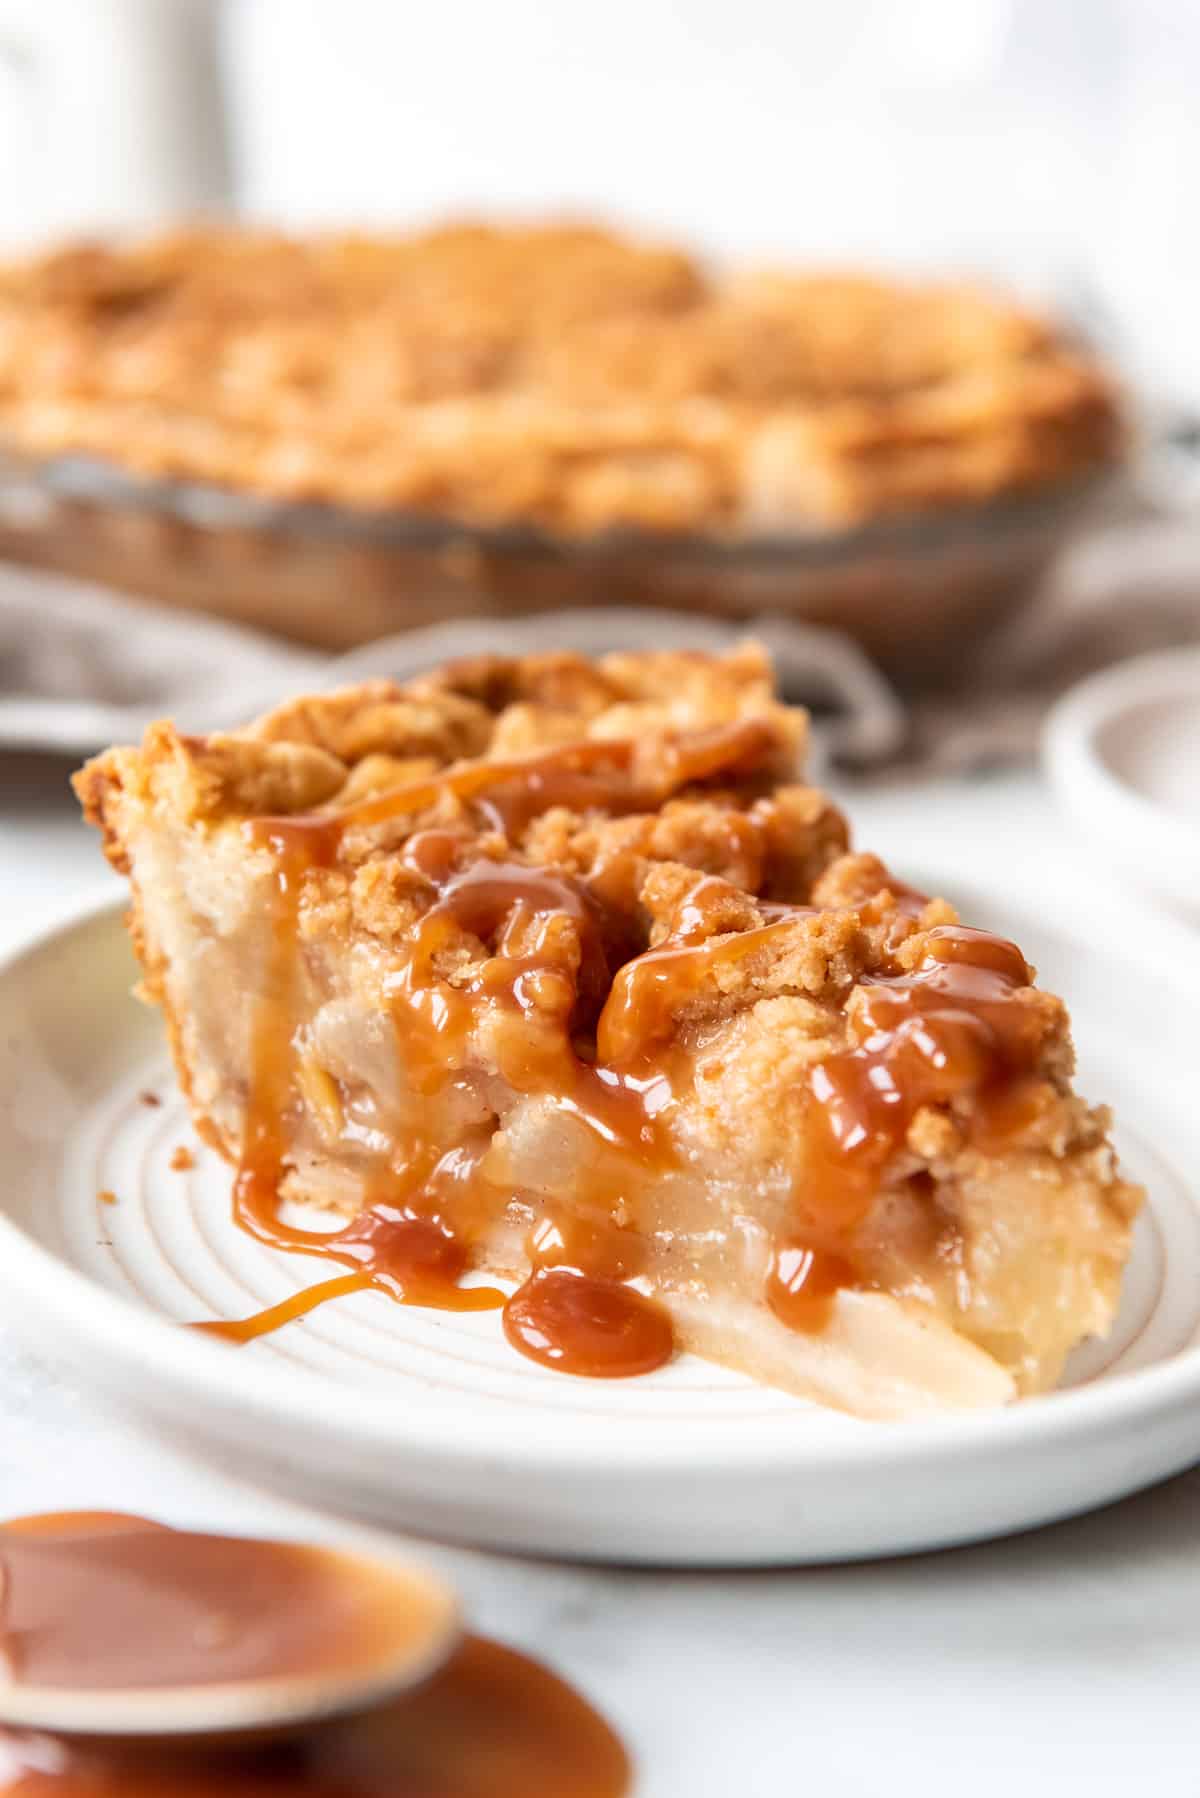 Caramel sauce on top of a slice of dutch pear pie on a plate with more pie in the background.